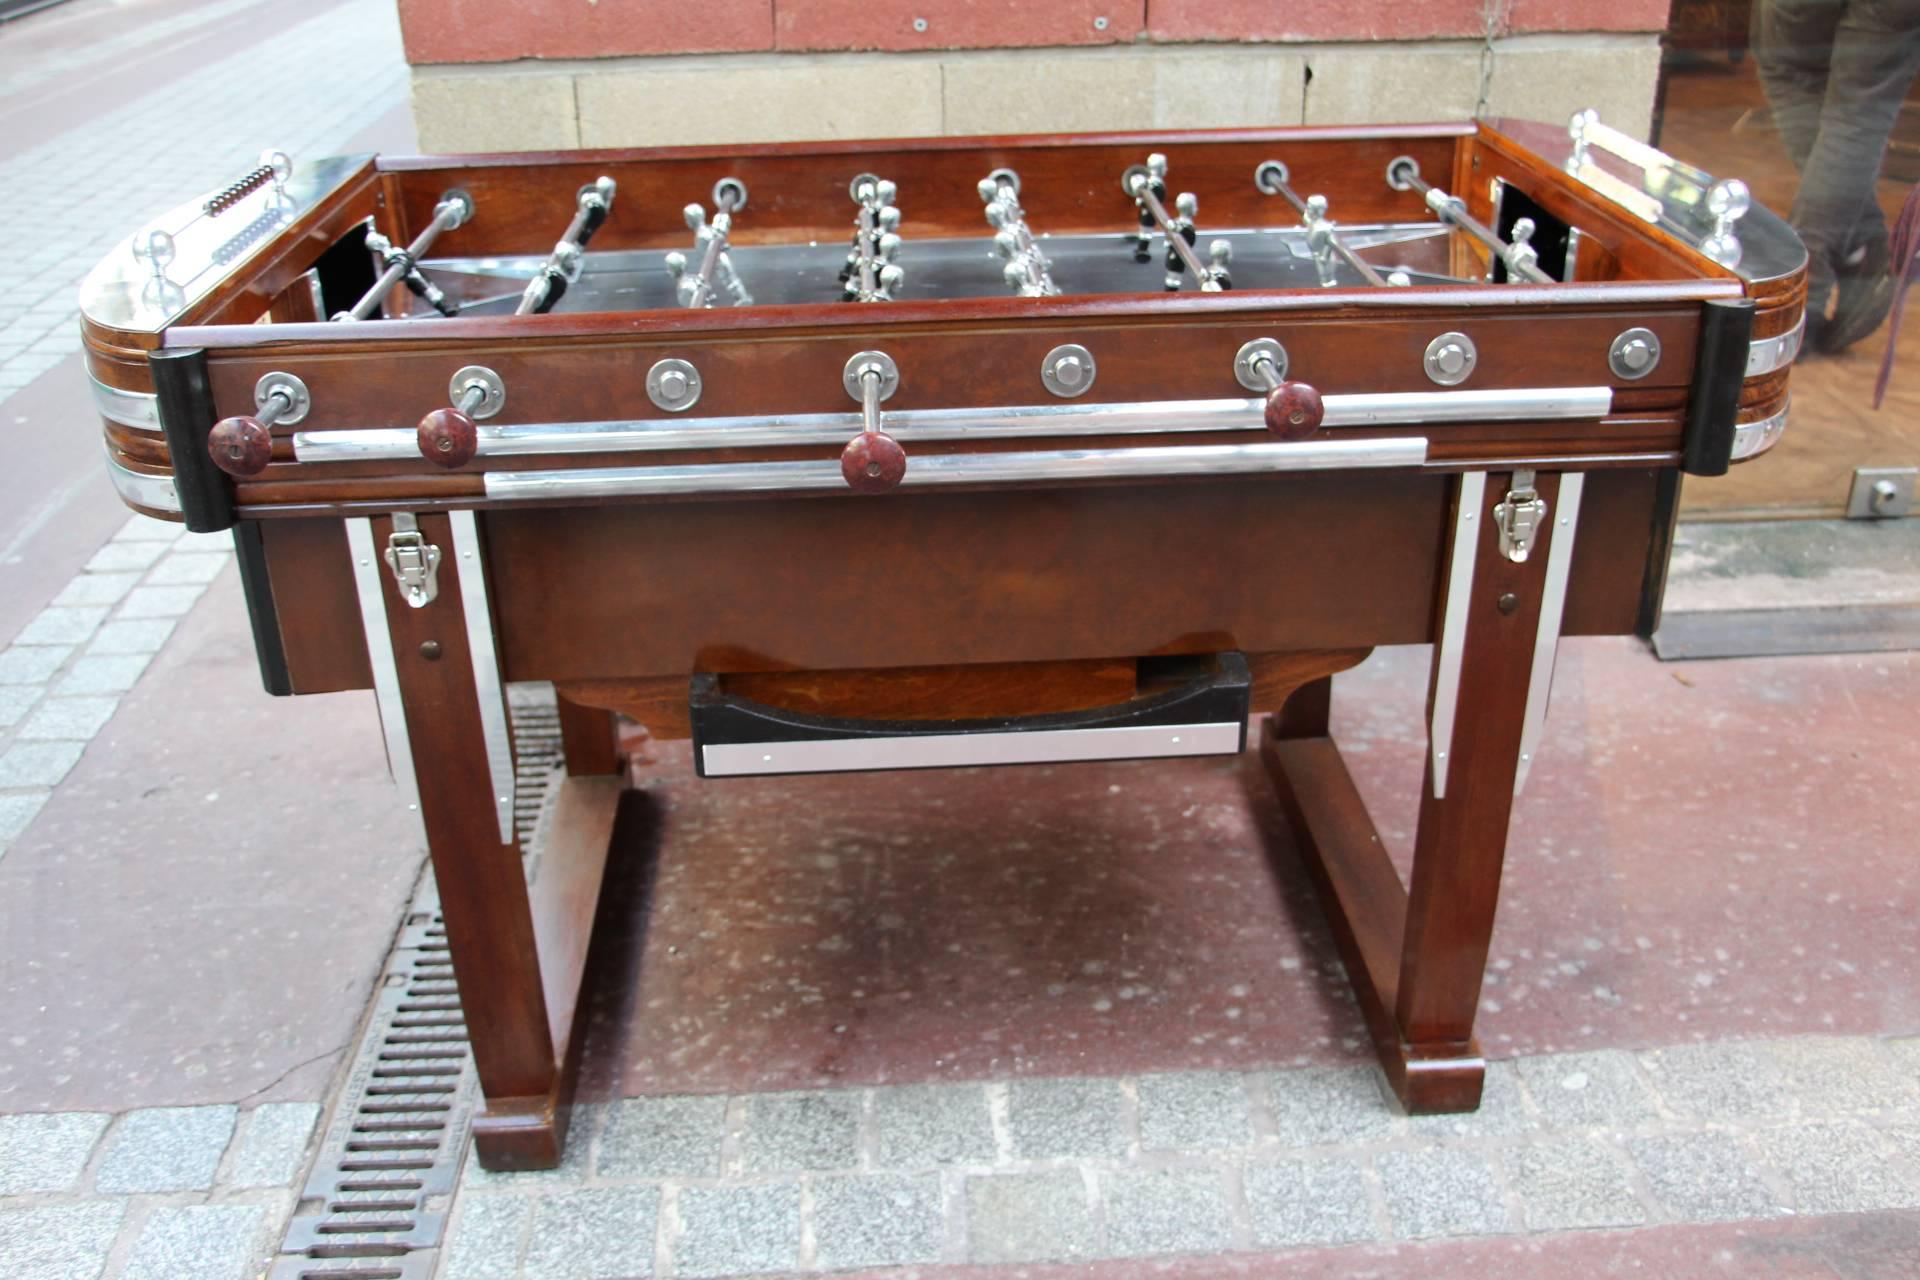 This wonderful foosball table features brown and black wood as well as many pieces of polished aluminium.
Its players are in polished and black aluminium.
Black playing 